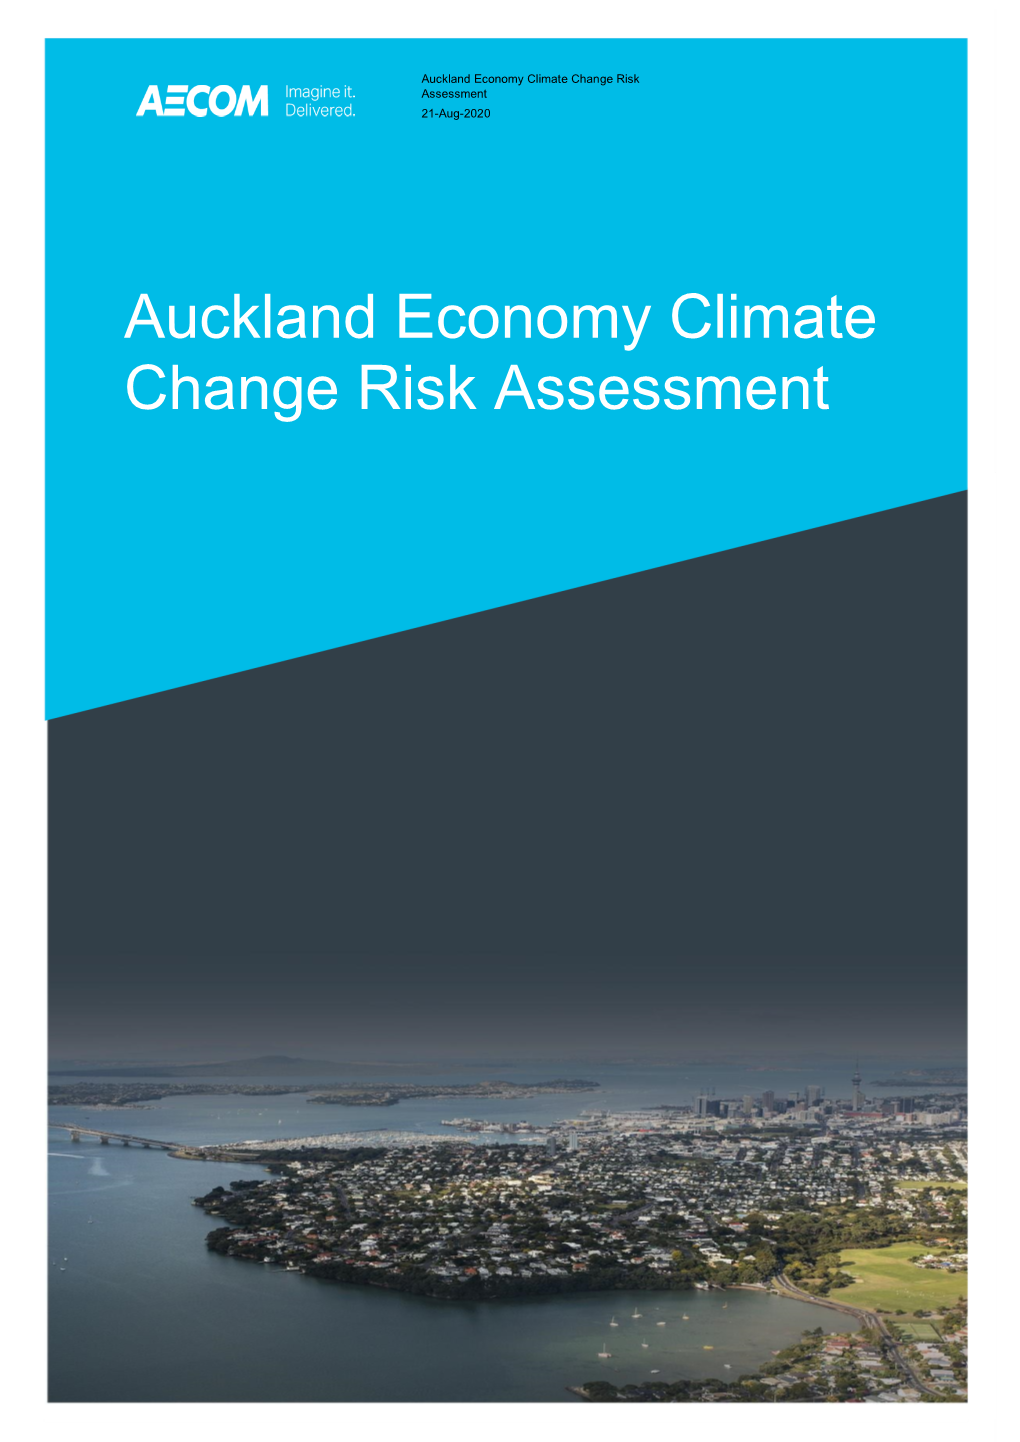 Auckland Economy Climate Change Risk Assessment 21-Aug-2020